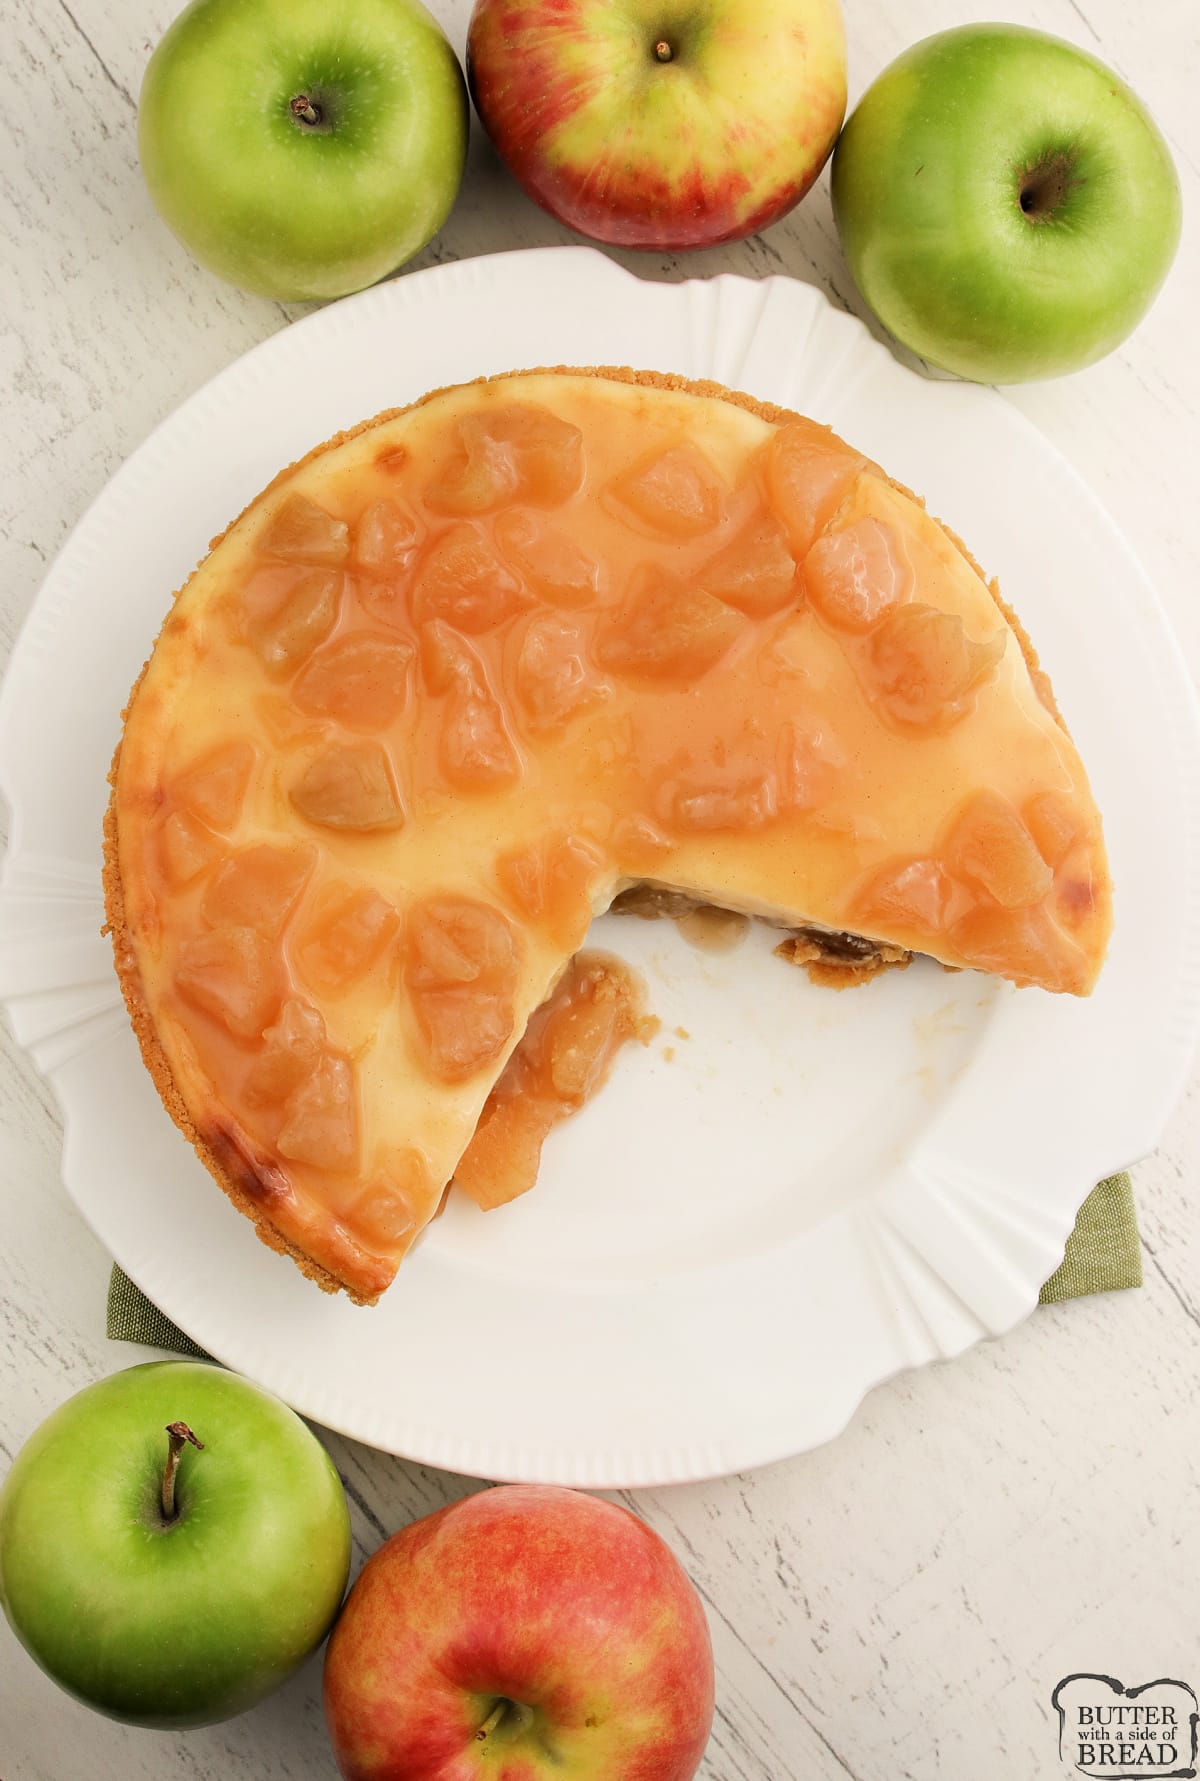 Cheesecake with apple pie filling and caramel